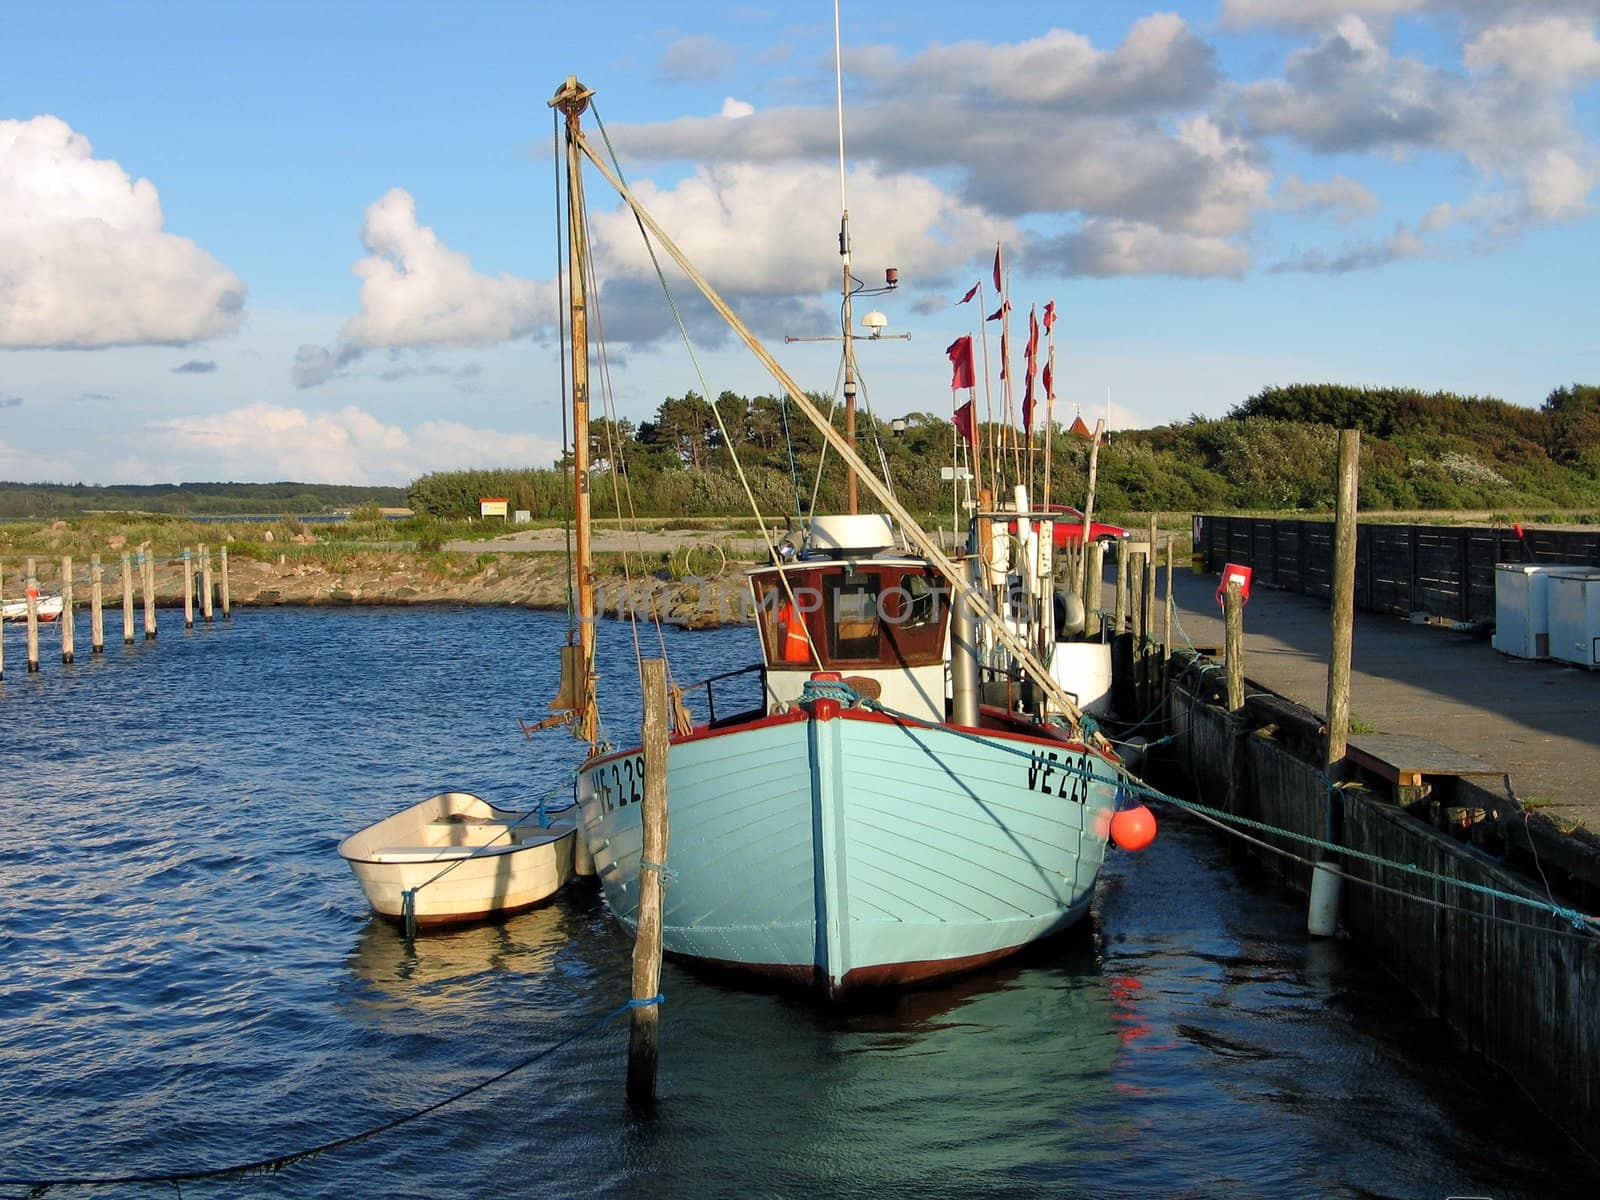 Colorful traditional fishing boat in a small port Funen Denmark